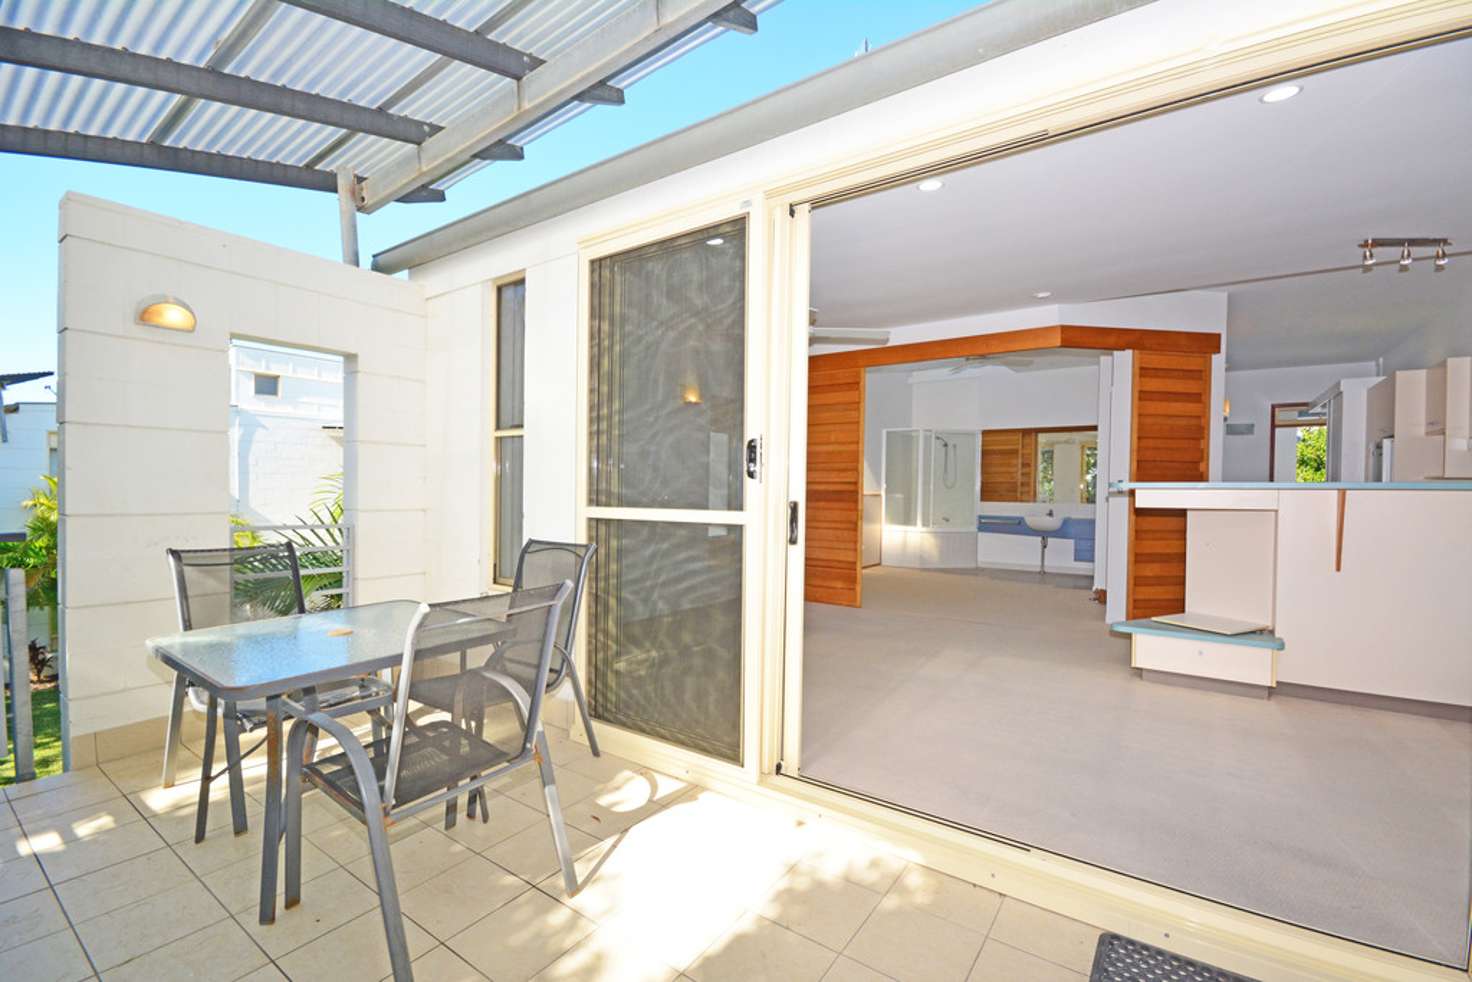 Main view of Homely apartment listing, 58/3 Cedarwood Court, Casuarina NSW 2487